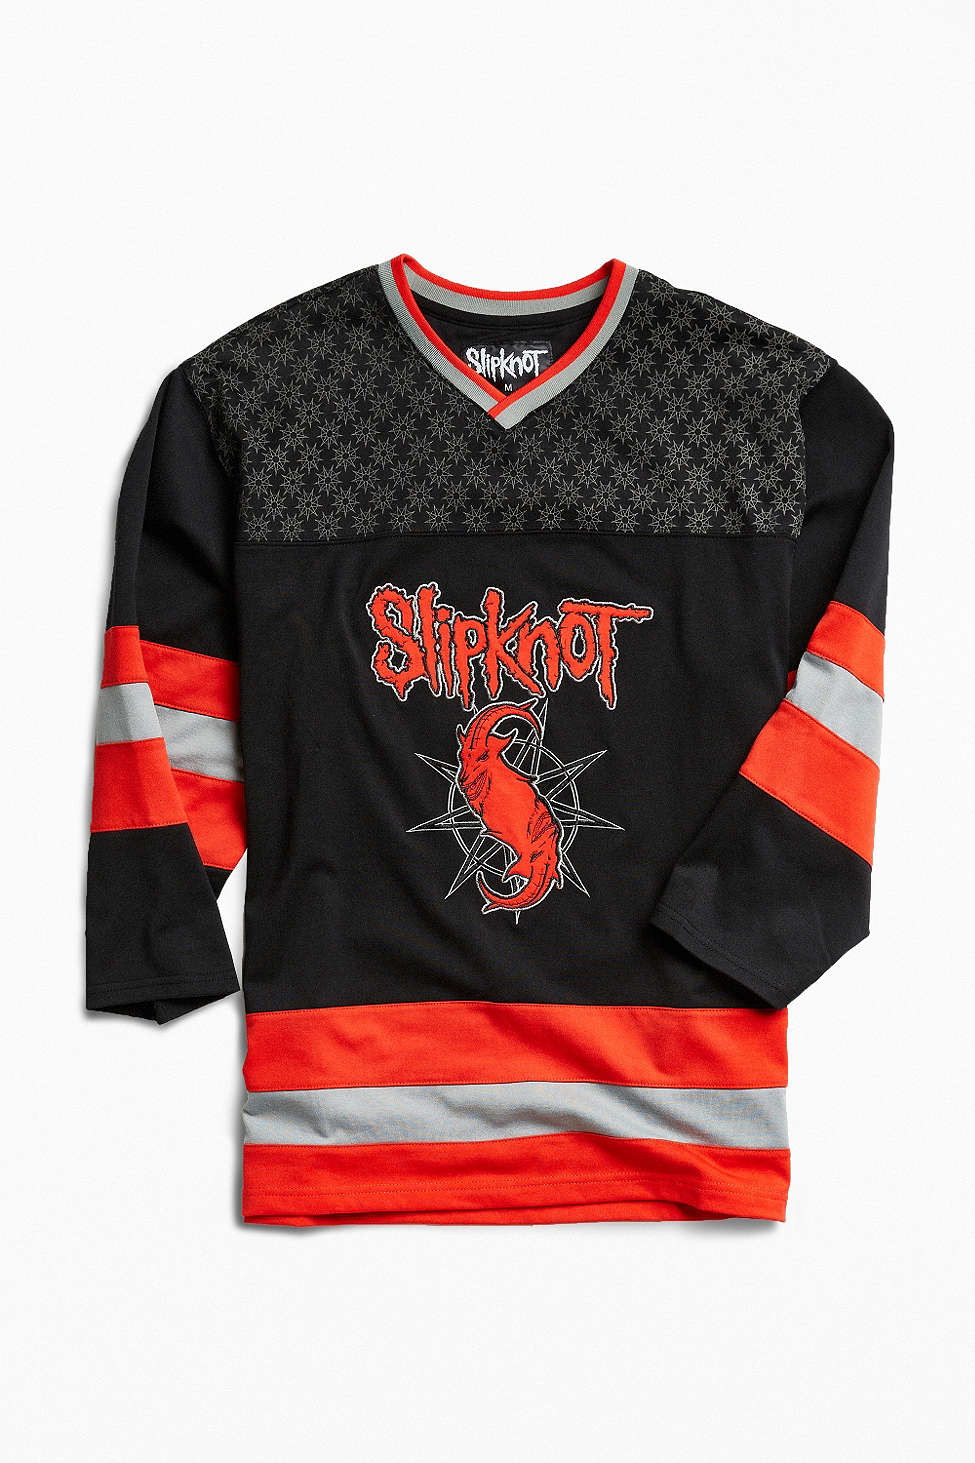 Download Lyst - Urban Outfitters Slipknot Hockey Jersey in Black ...